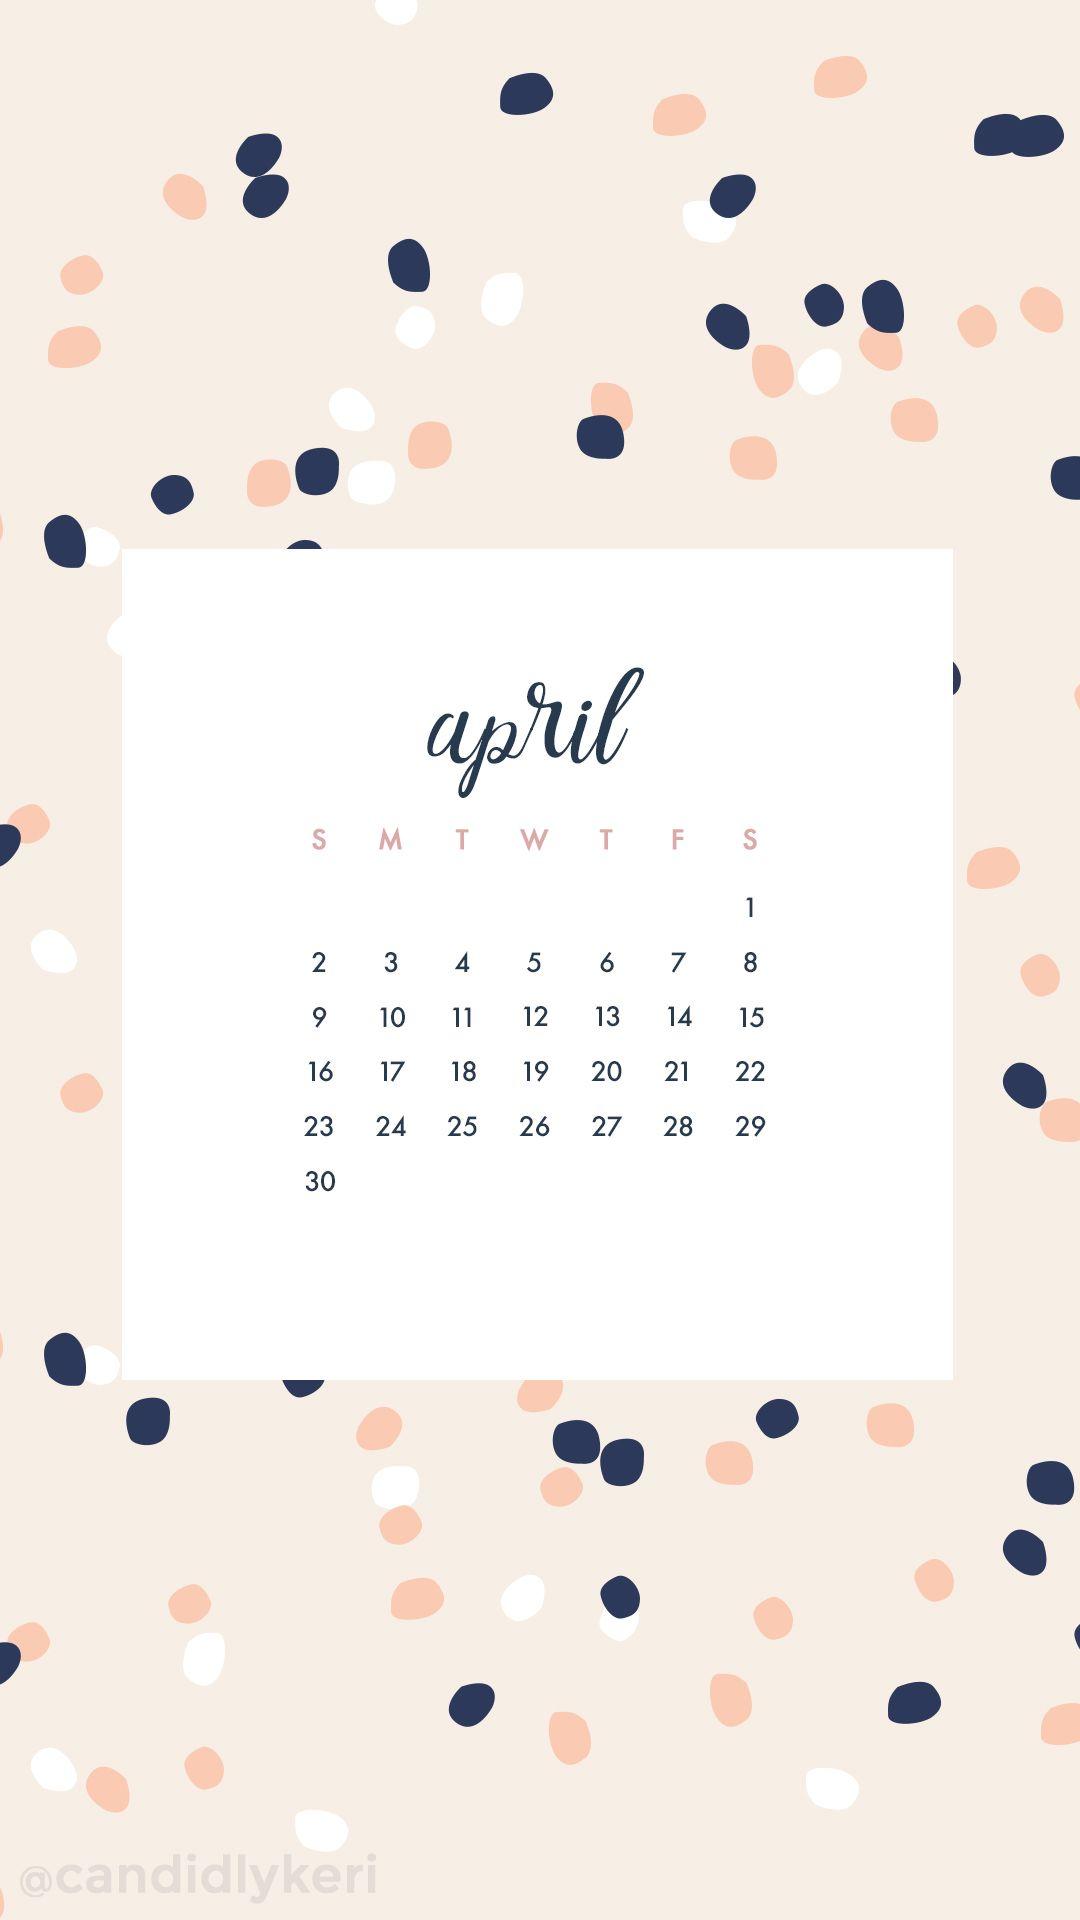 April calendar 2017 wallpaper you can download for free on